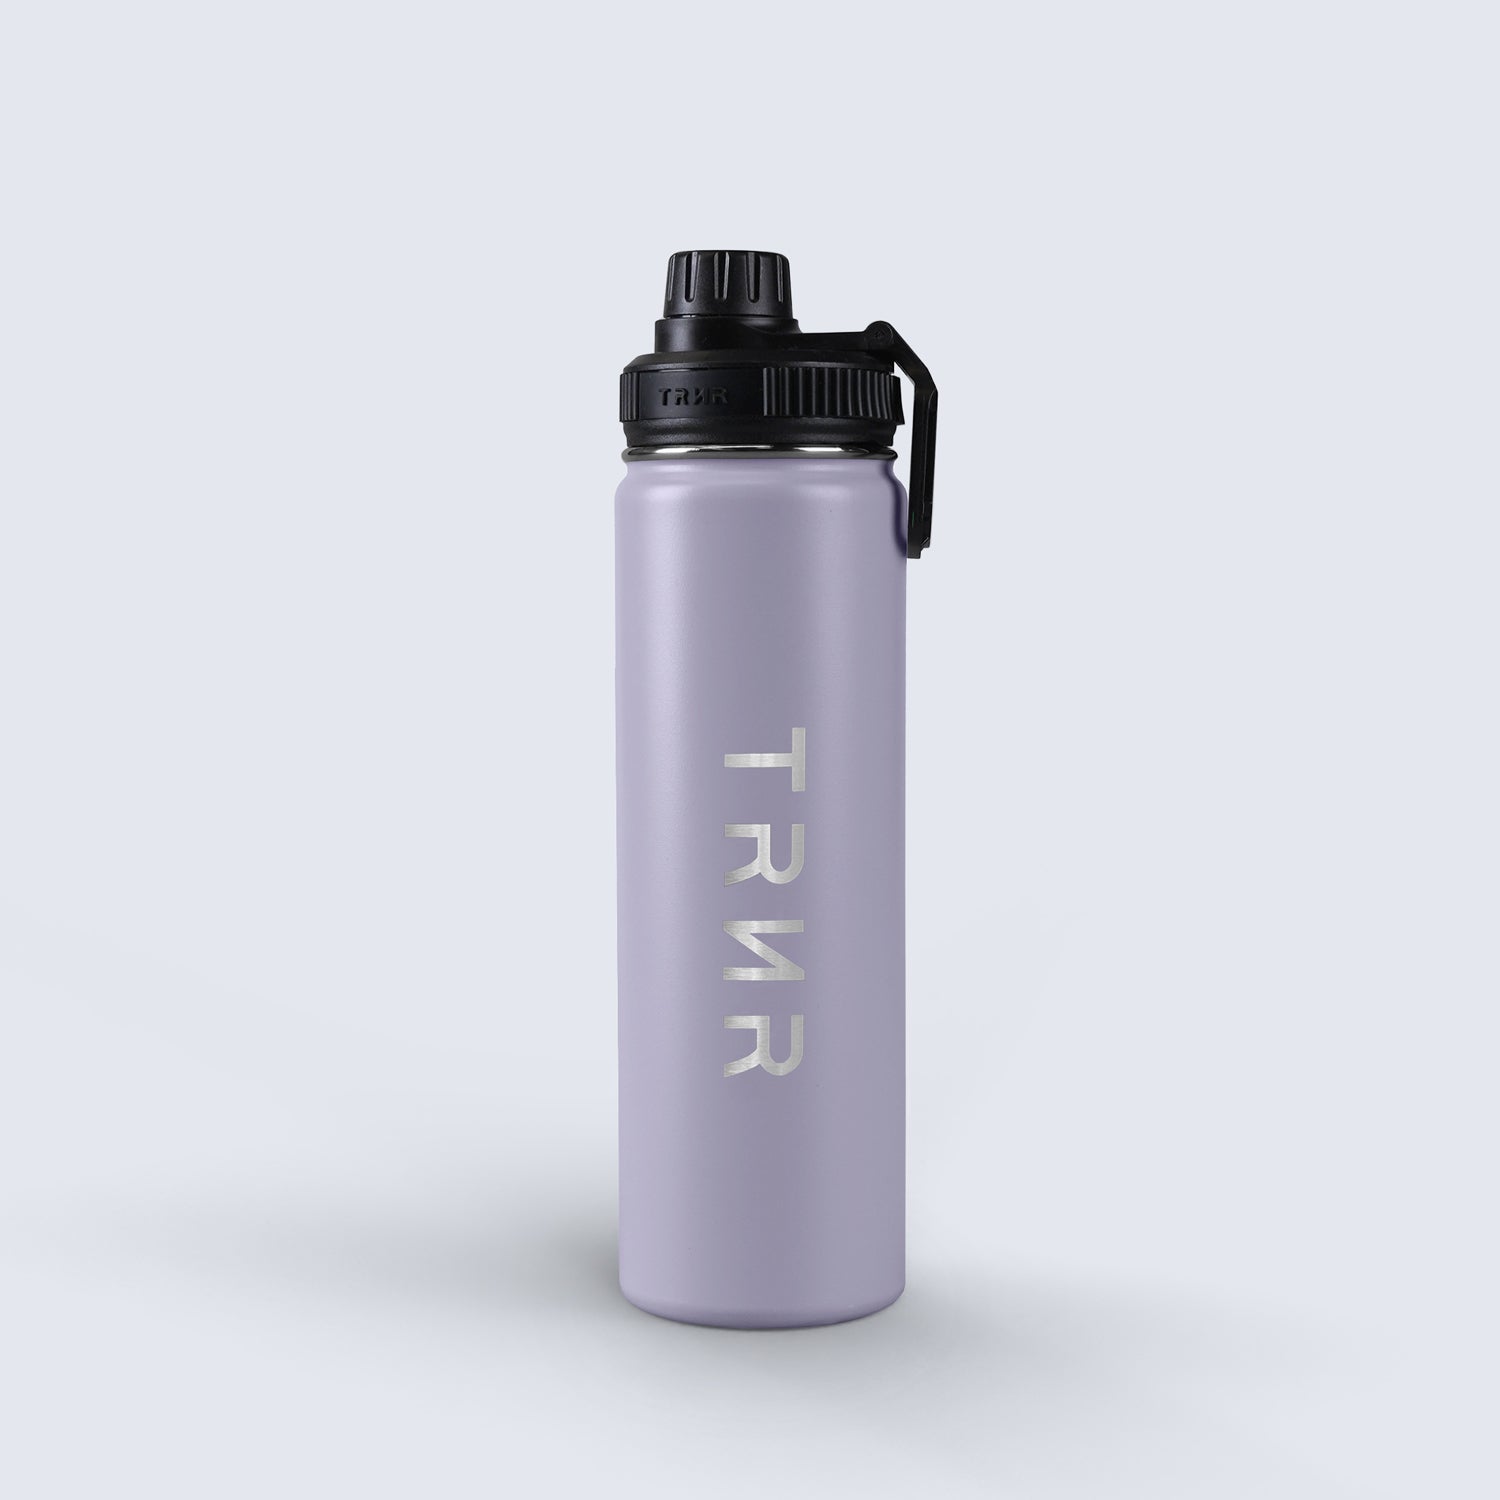 TRNR Studio Bottle (Lilac) in 710 ml capacity | Product Overview Featuring TRNR Logo and Screw Lid with Handle